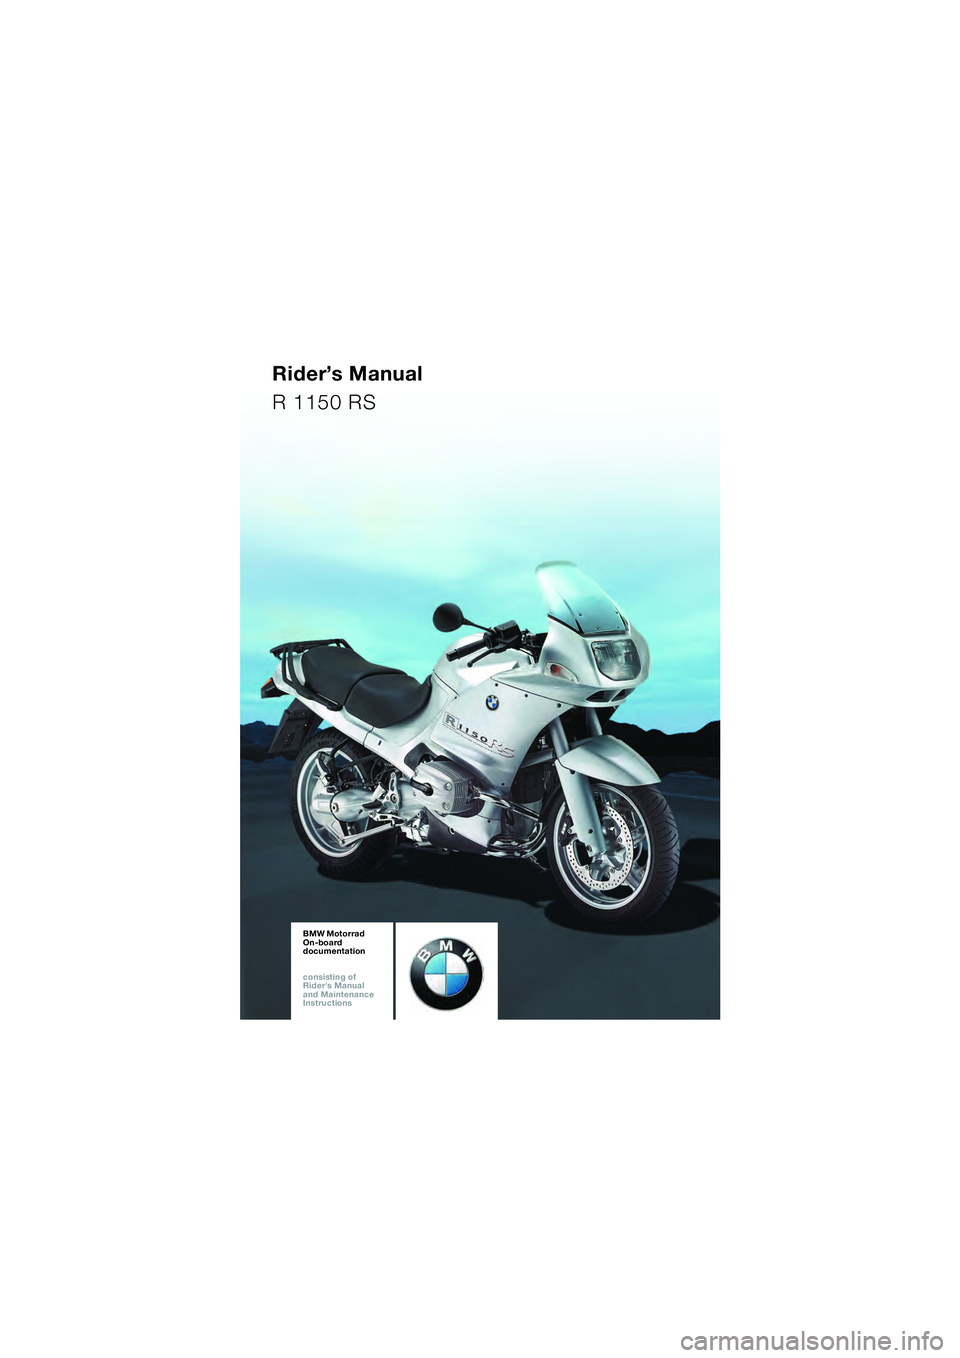 BMW MOTORRAD R 1150 RS 2002  Riders Manual (in English) 1
BA_Titel_Blank.fm  Seite 93  Montag, 4. November 2002  2:36 14
BMW Motorrad
On-board  
documentation
consisting of  
Riders Manual  
and Maintenance  
Instructions
Rider’s Manual
R 1150 RS 